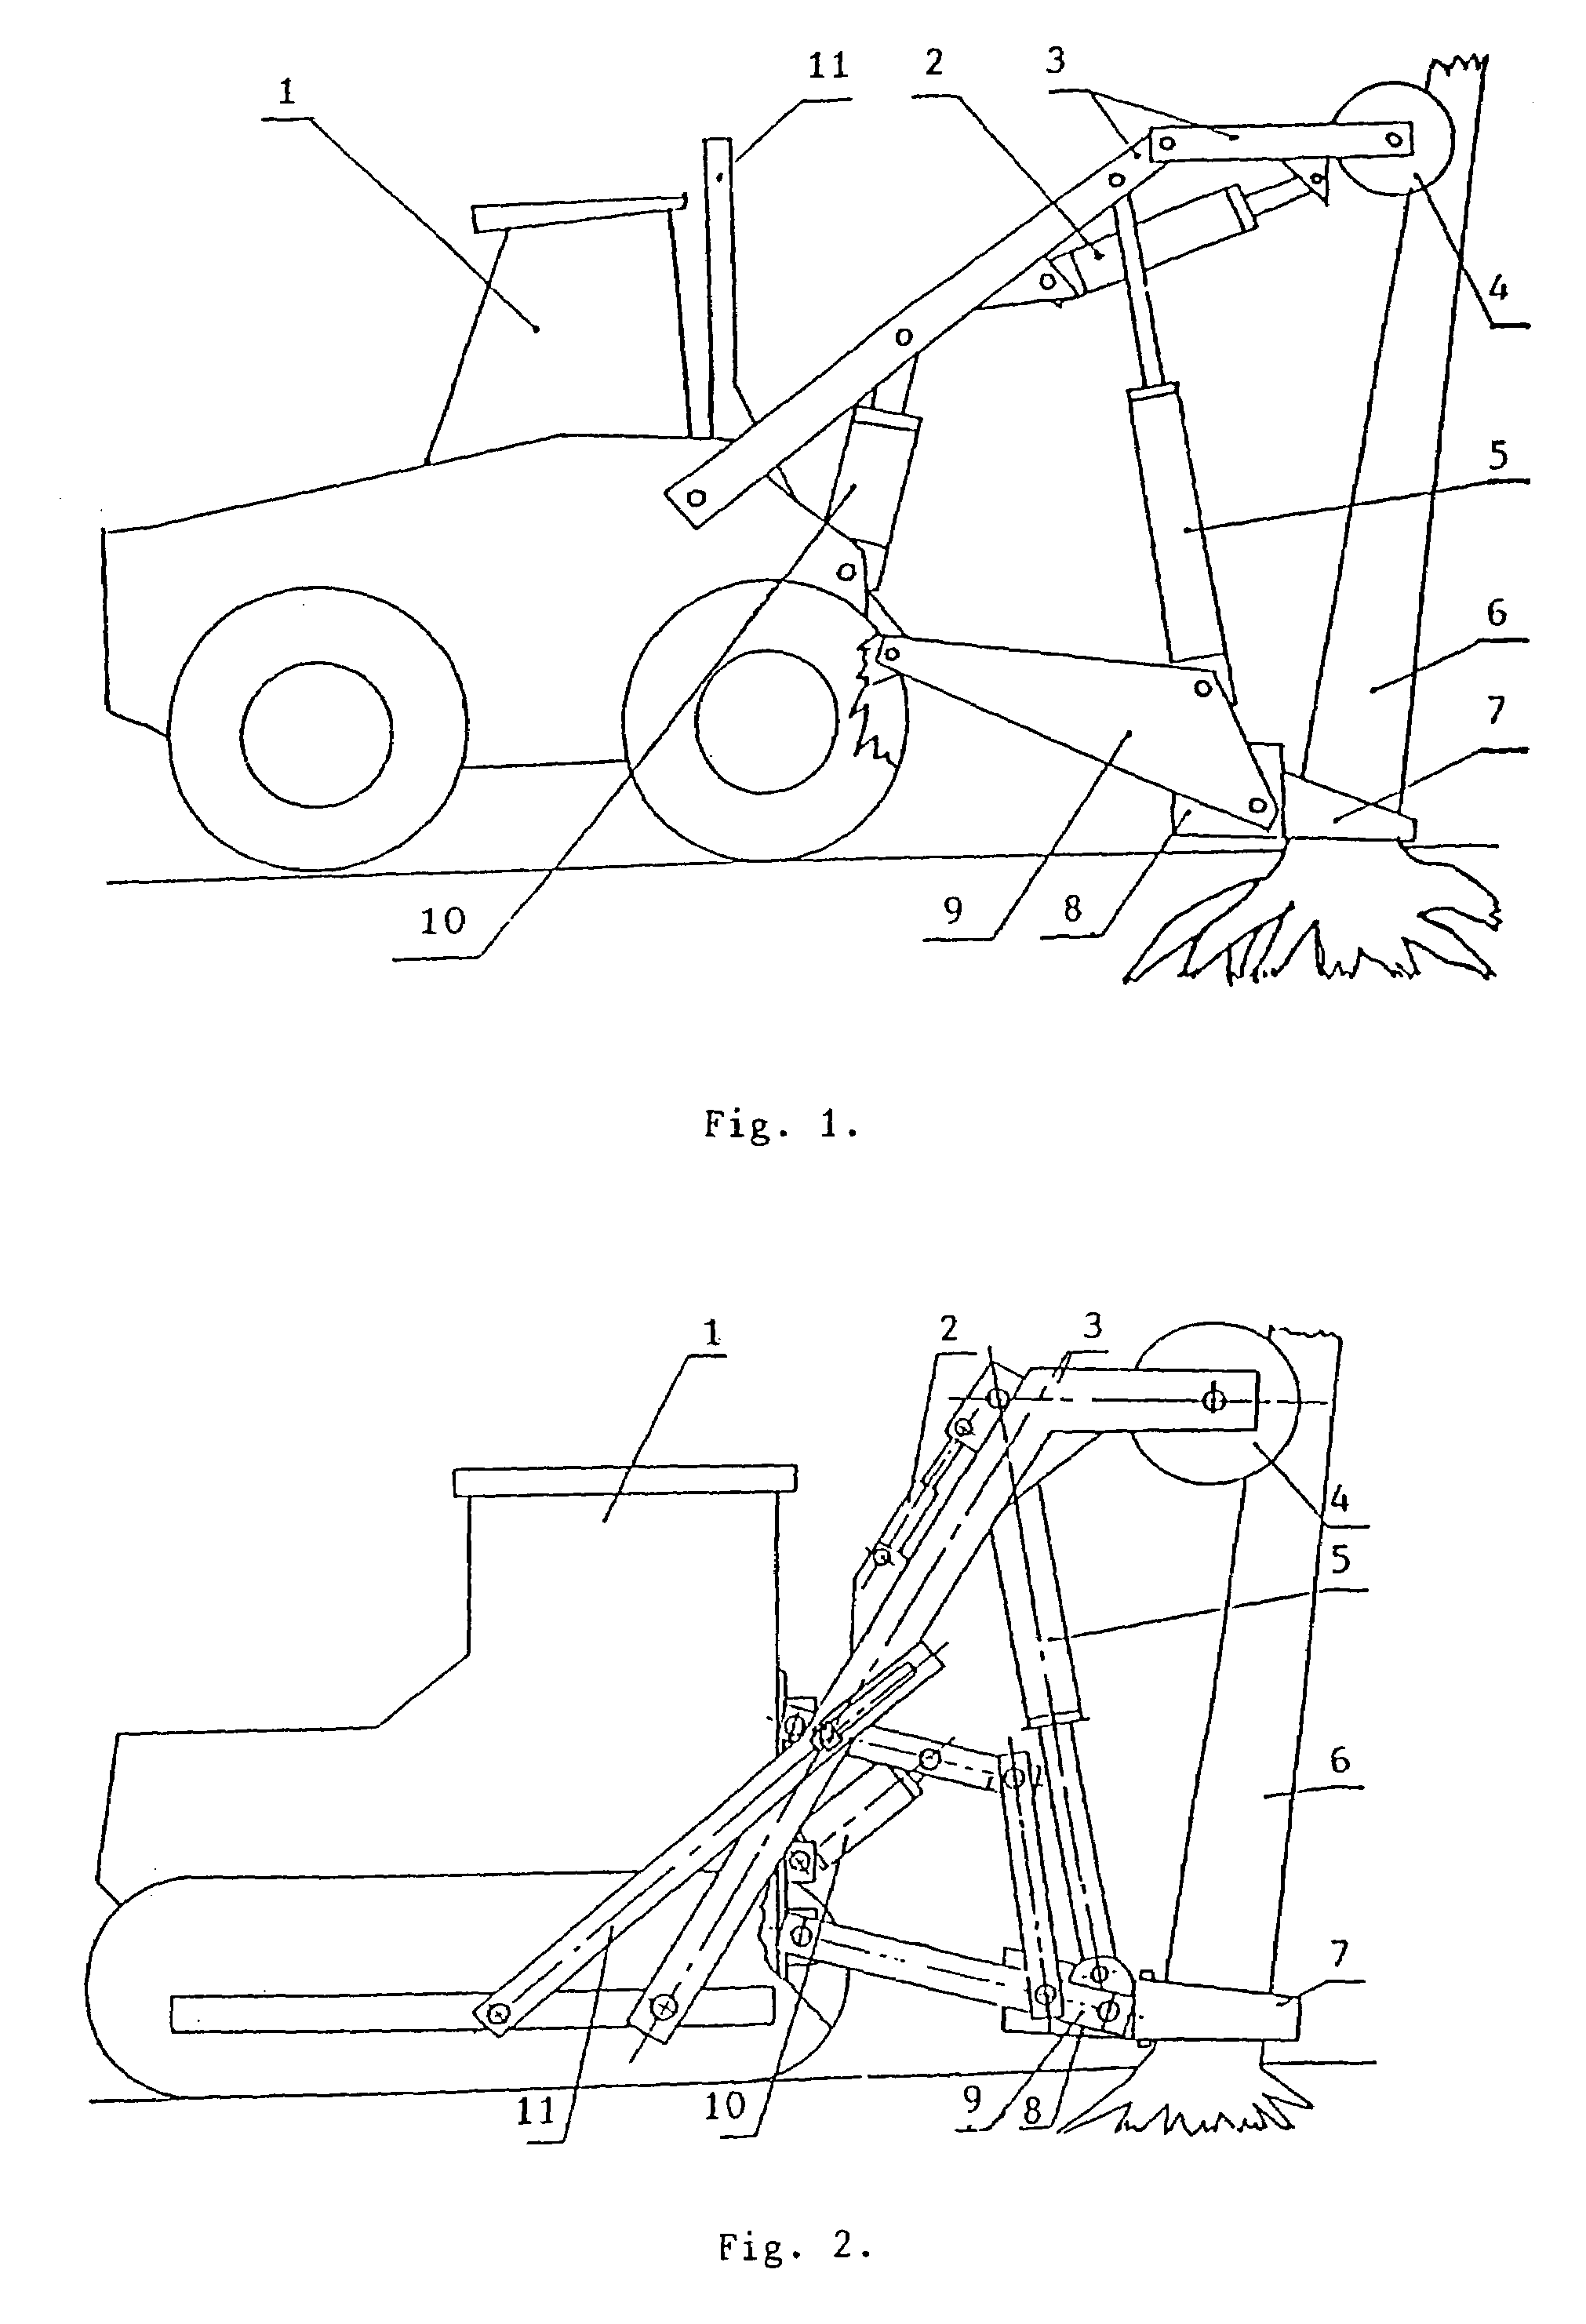 Process and apparatus for uprooting trees